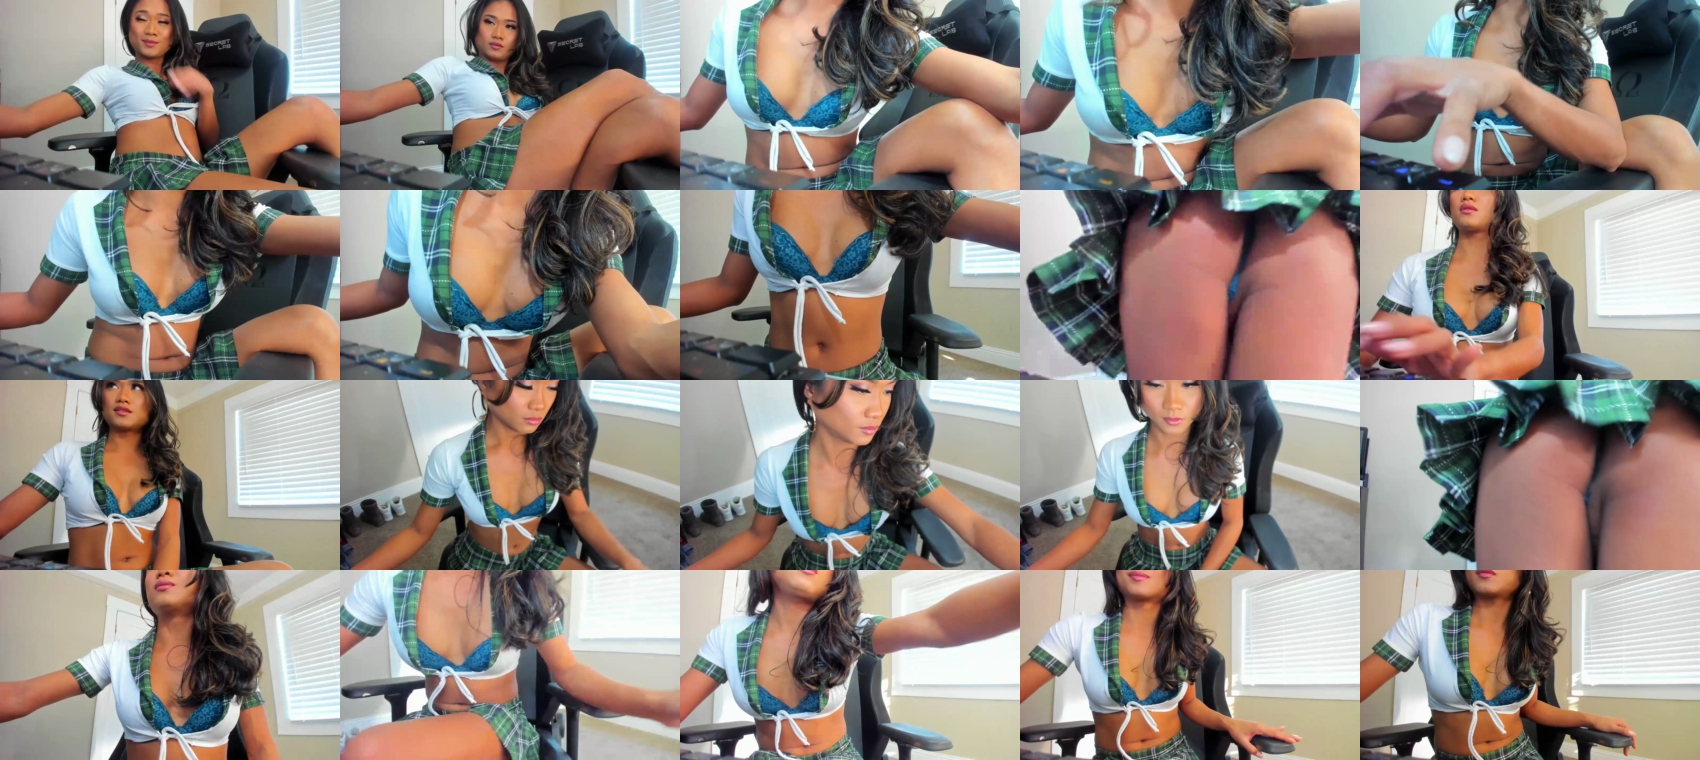 ynaong juicy CAM SHOW @ Chaturbate 17-01-2022